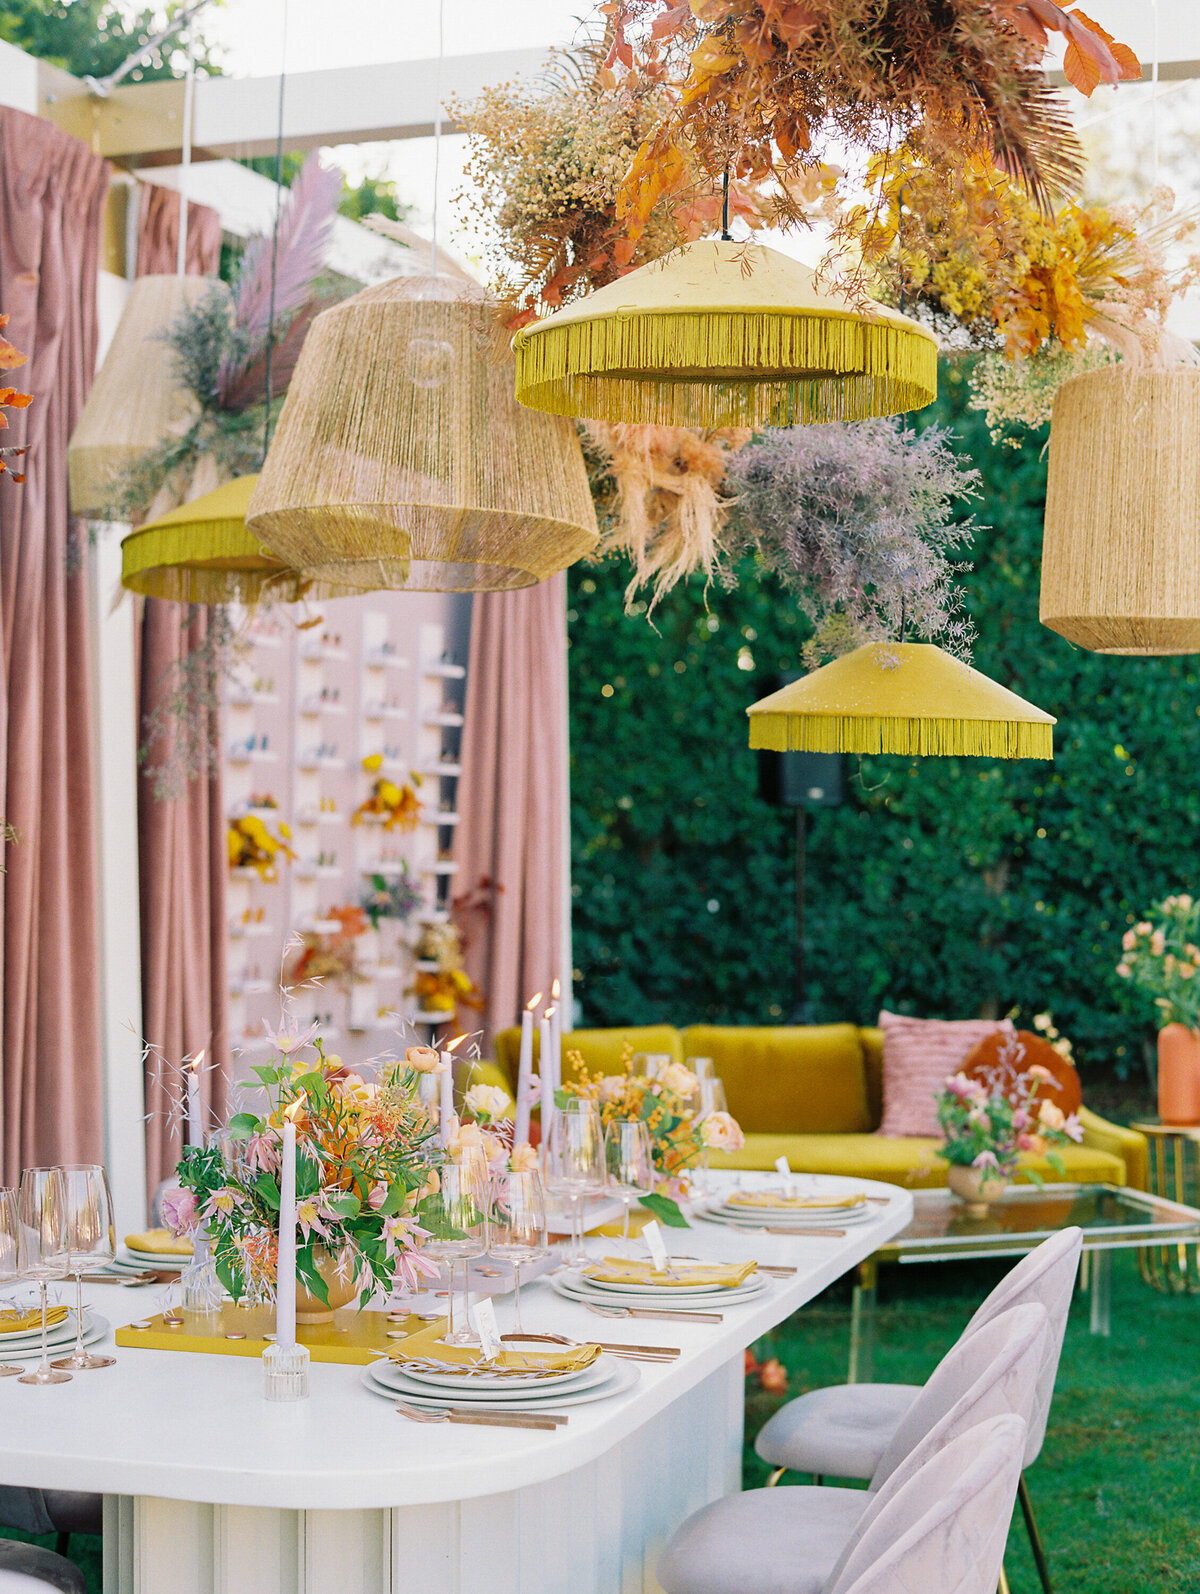 seating area with yellow sofa and rust colored chair adorned with flowers and seating chart with sunglasses for guests.